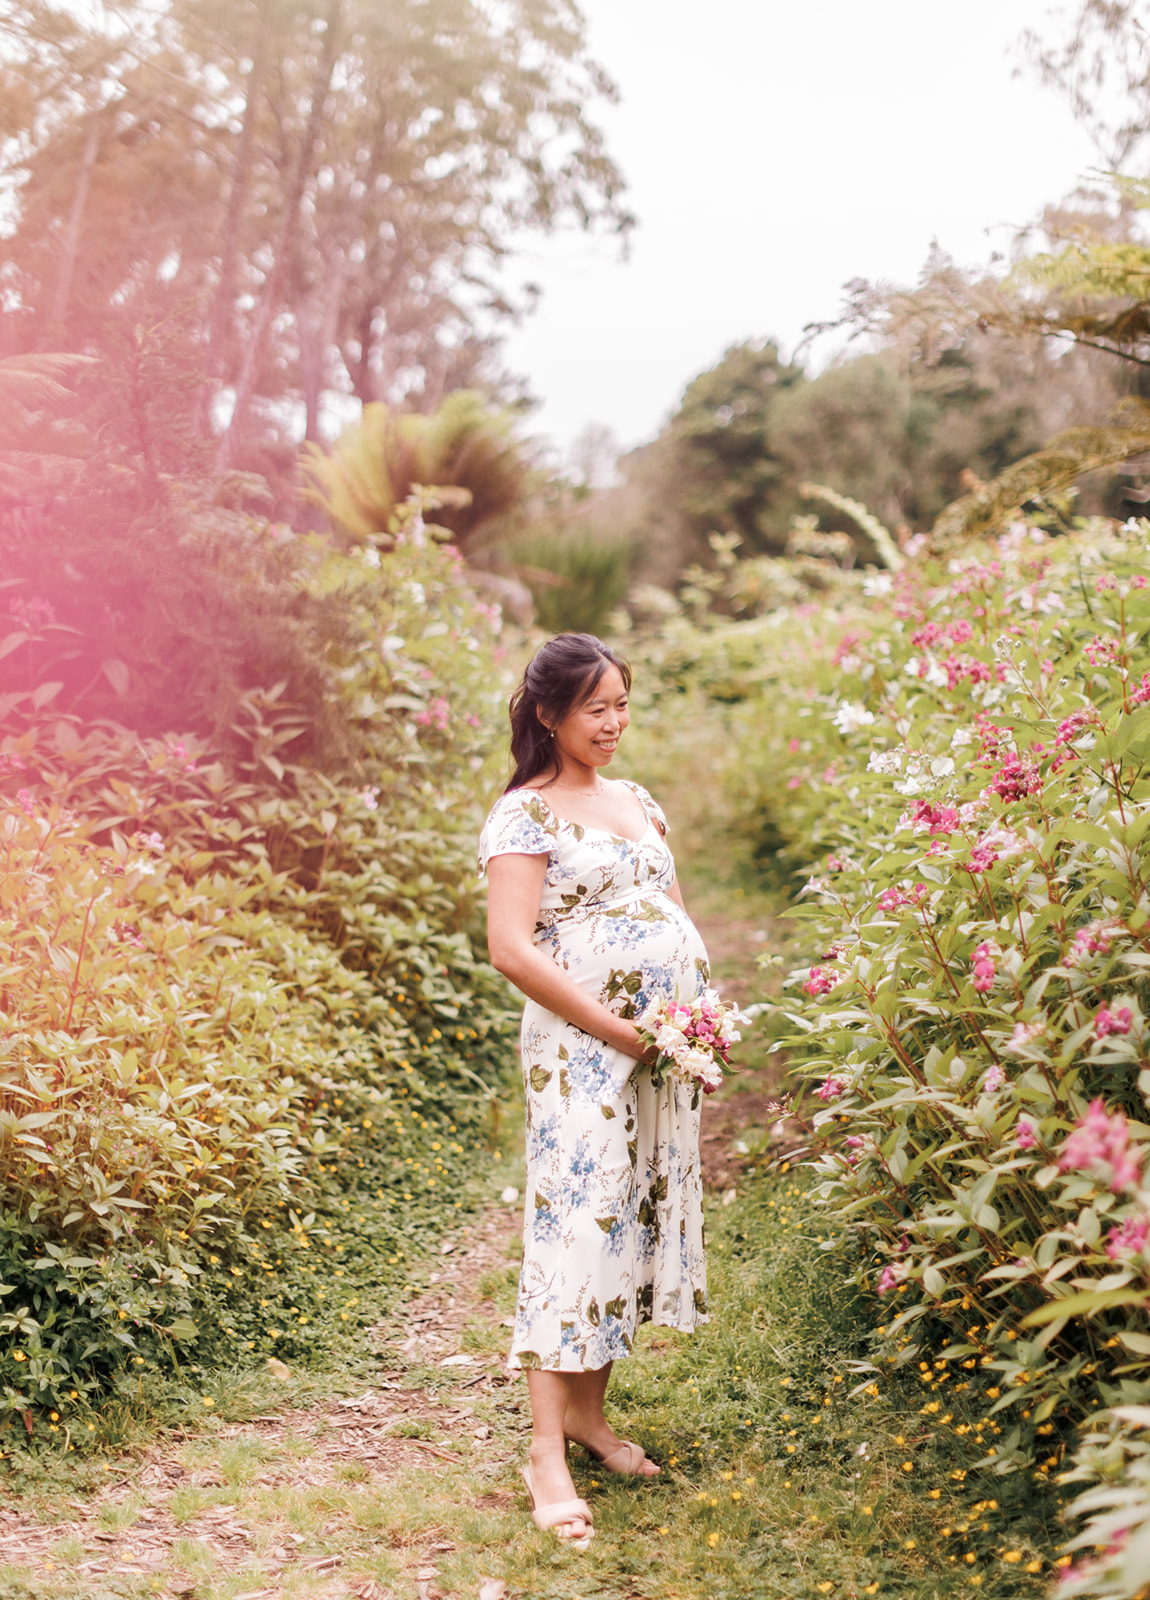 Natural maternity photo shoot, and beautiful grassy area with wildflowers inside Golden Gate Park in San Francisco